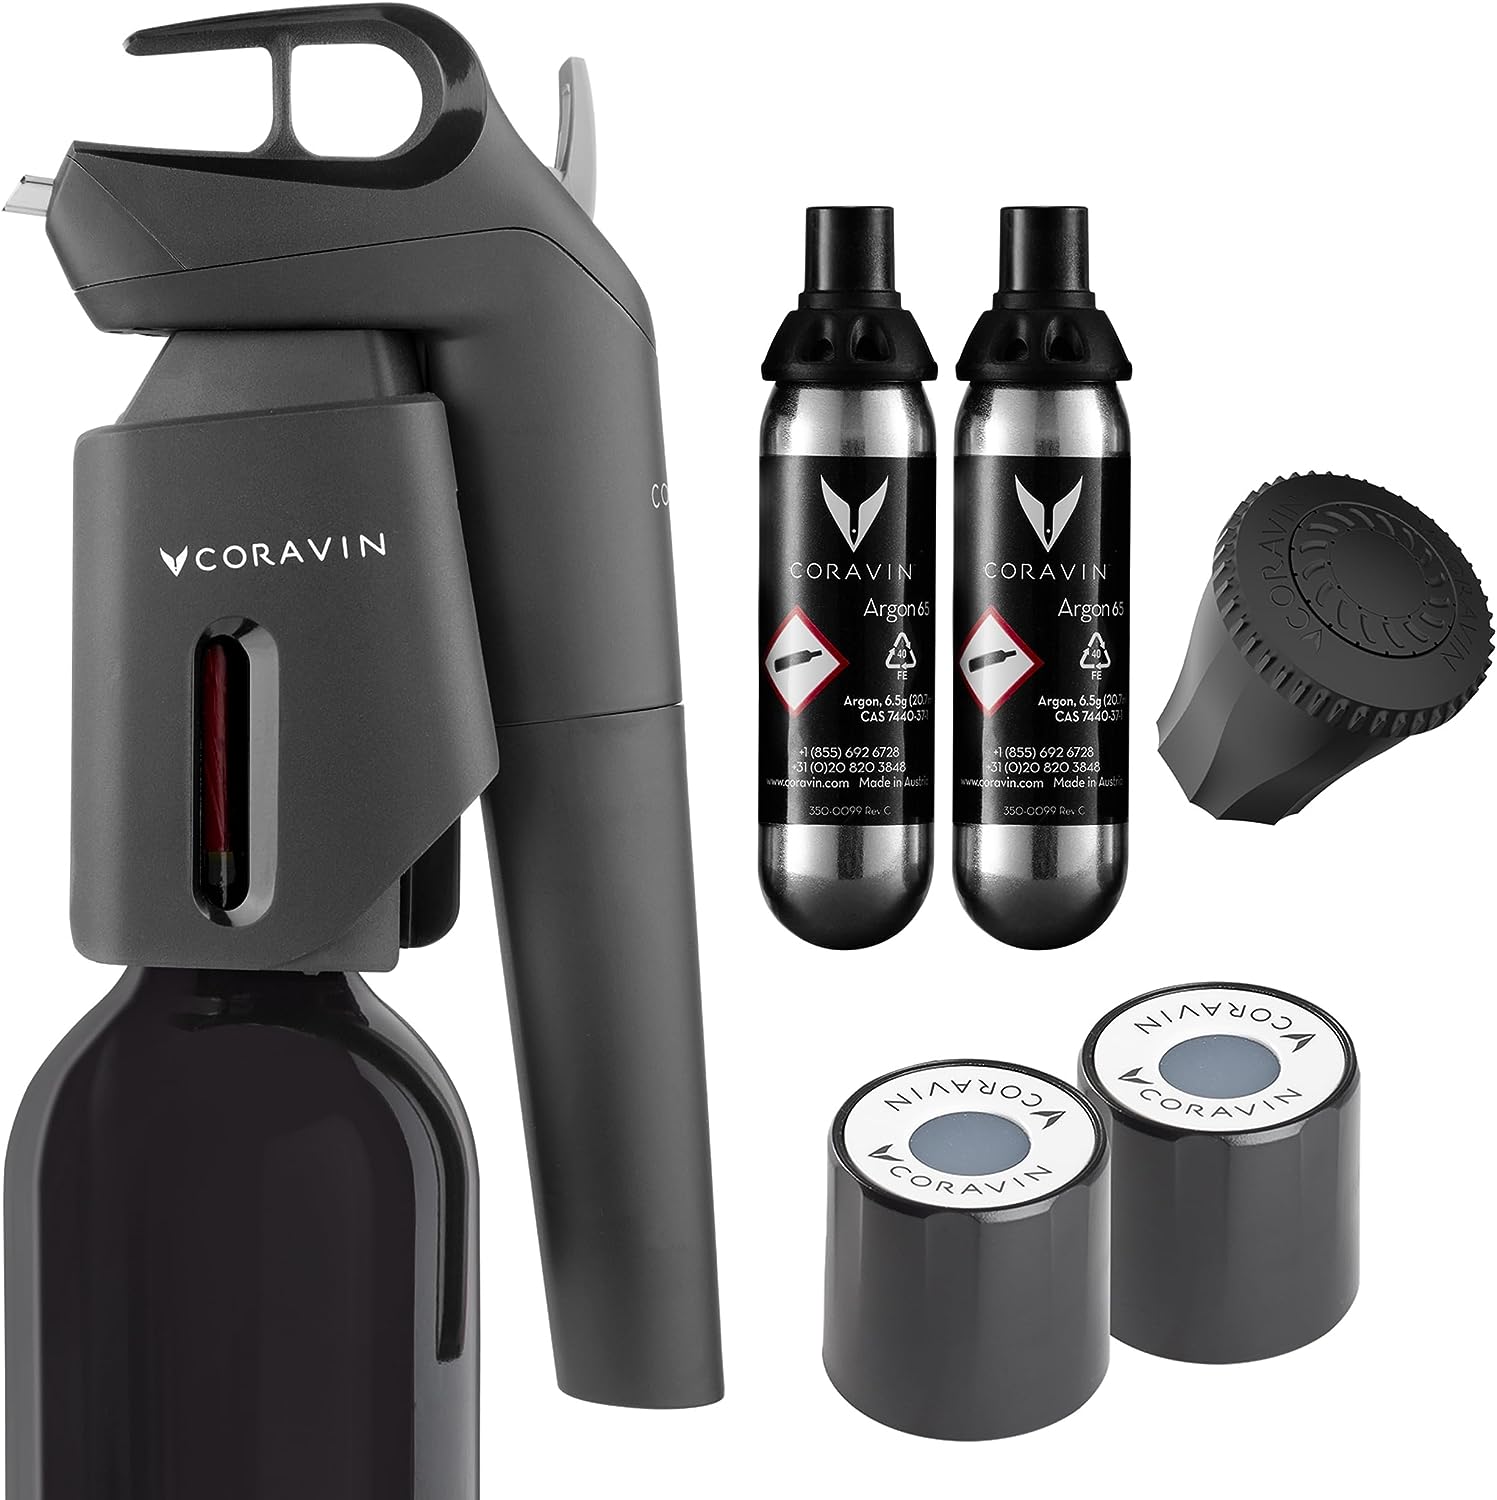 Coravin Timeless Three Plus Wine Preservation System With 2 Argon Gas Capsules & Wine Aerator